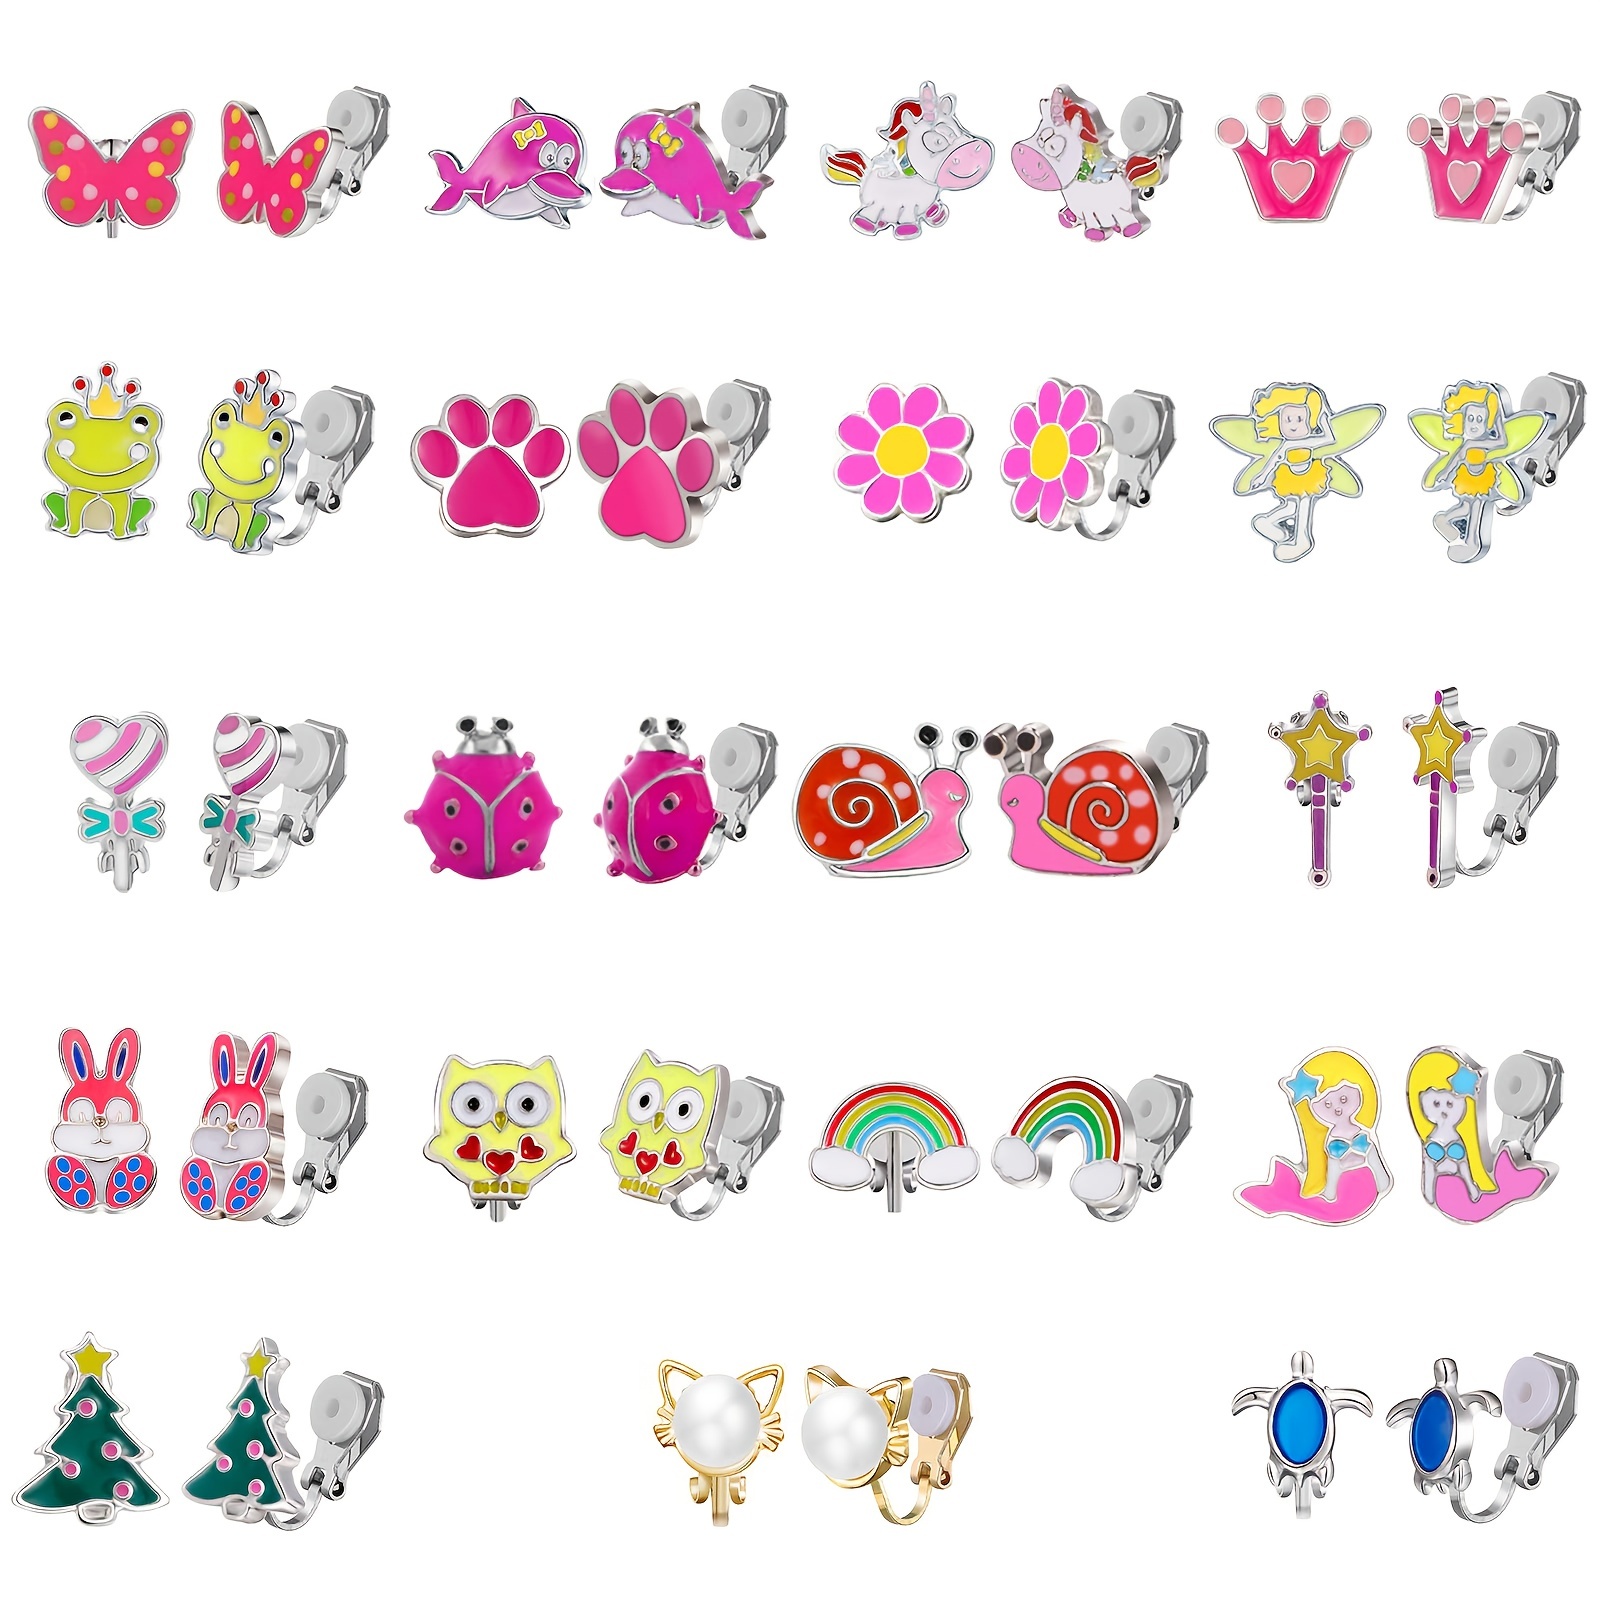 Disney Princess 24 Pairs sticker earrings with heart shaped and crown  shaped design